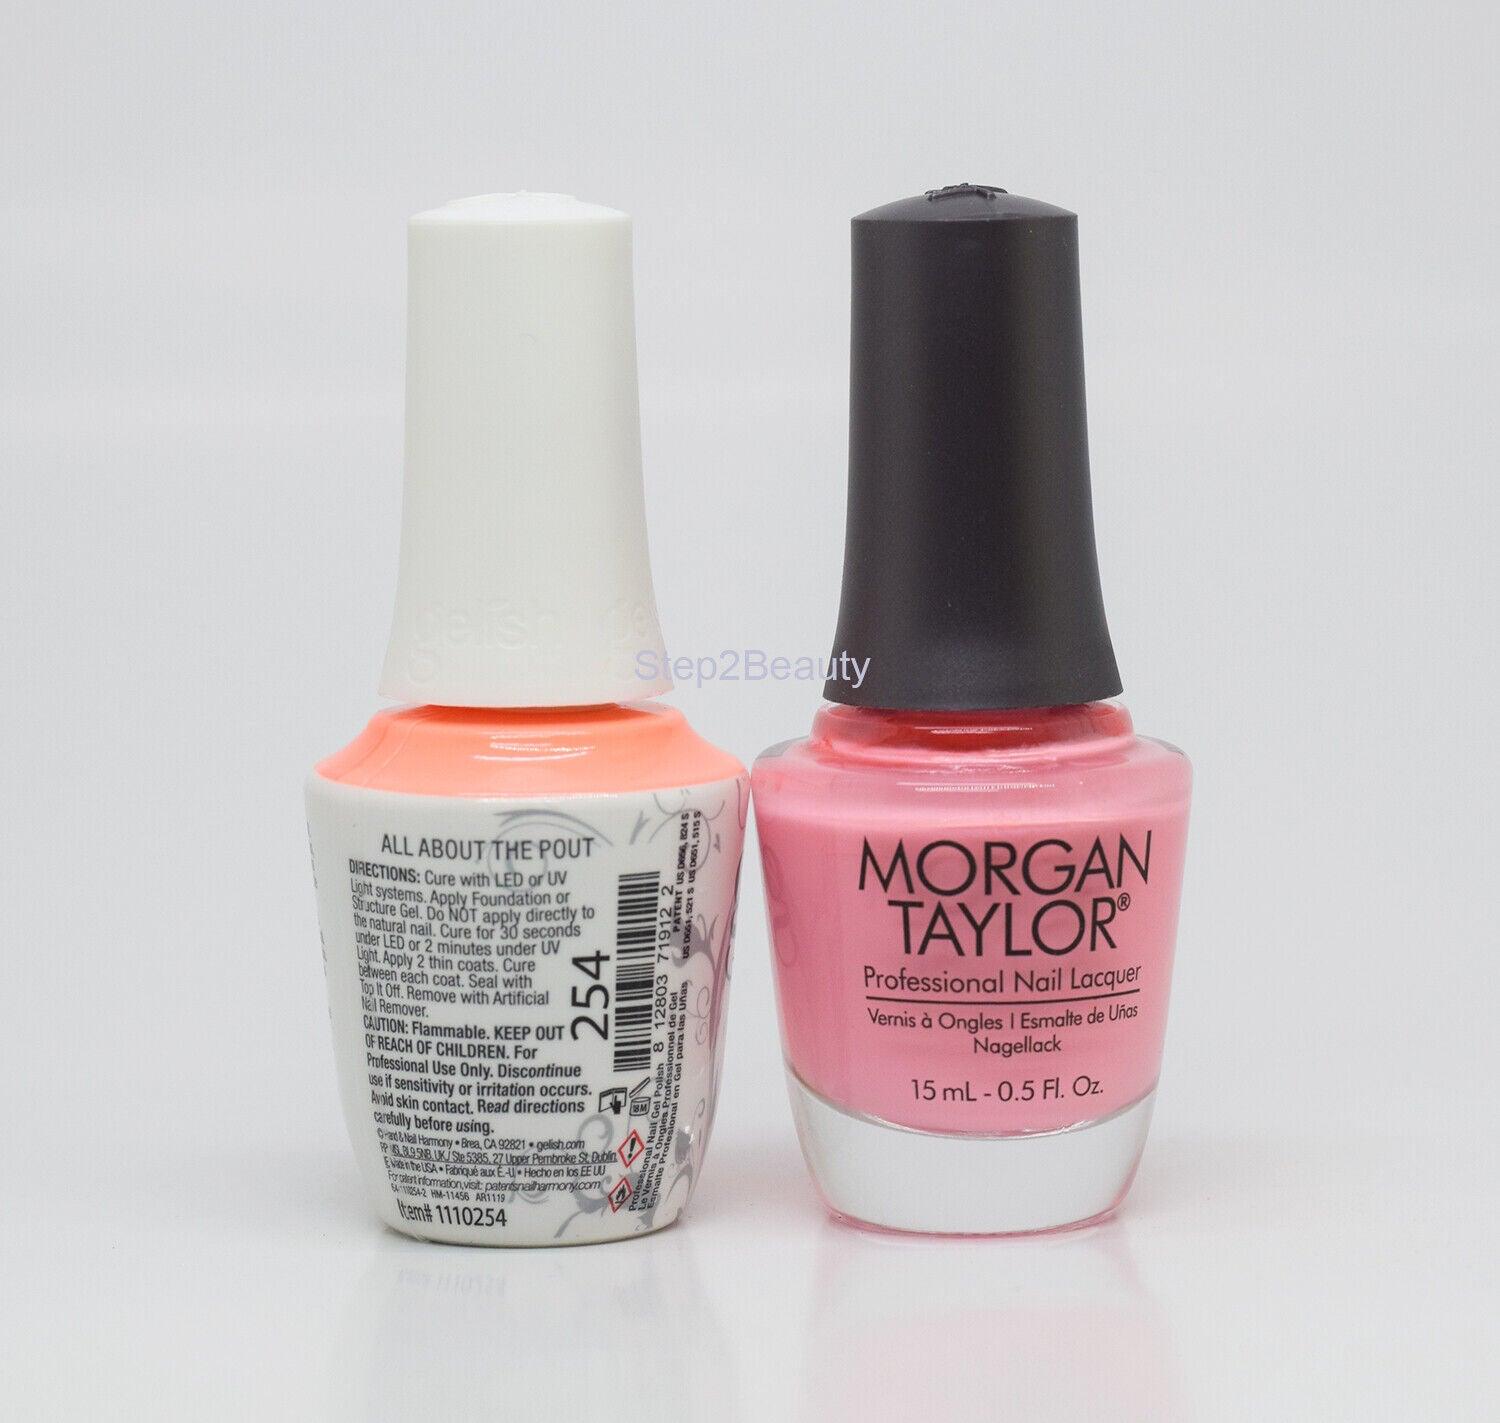 Gelish DUO Soak Off Gel Polish + Morgan Taylor Lacquer - #254 All About The Pout